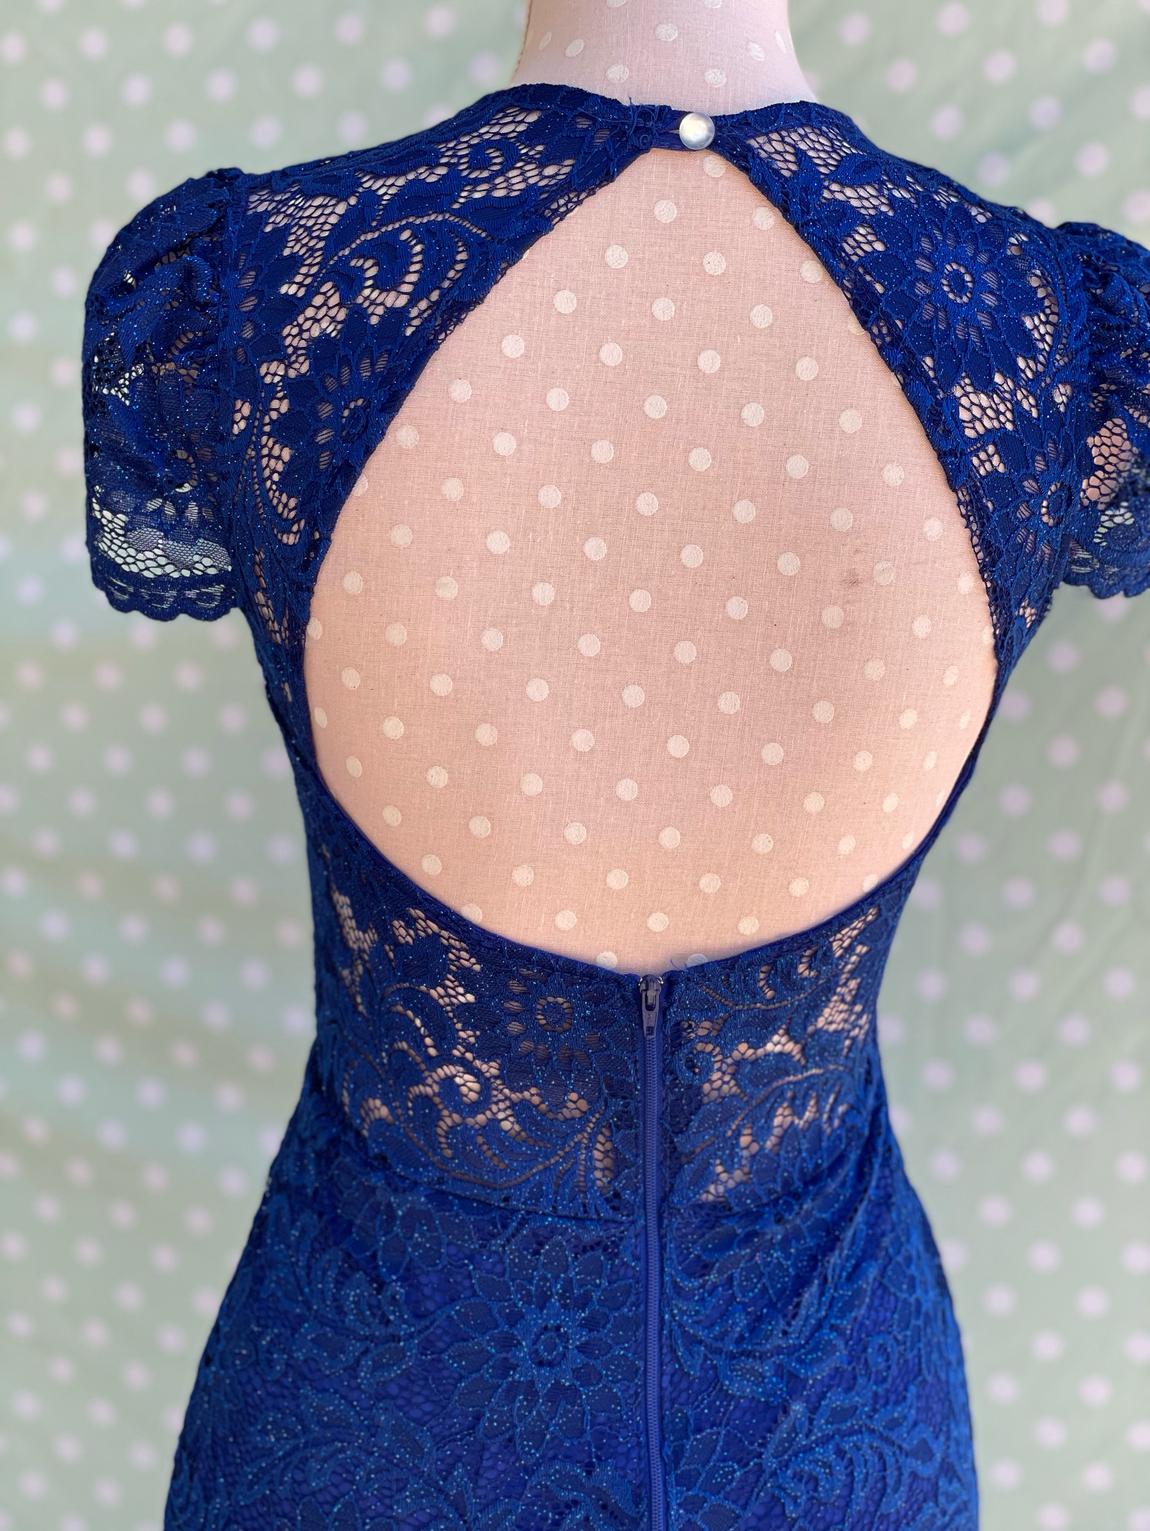 Size 4 Prom Cap Sleeve Lace Royal Blue Mermaid Dress on Queenly